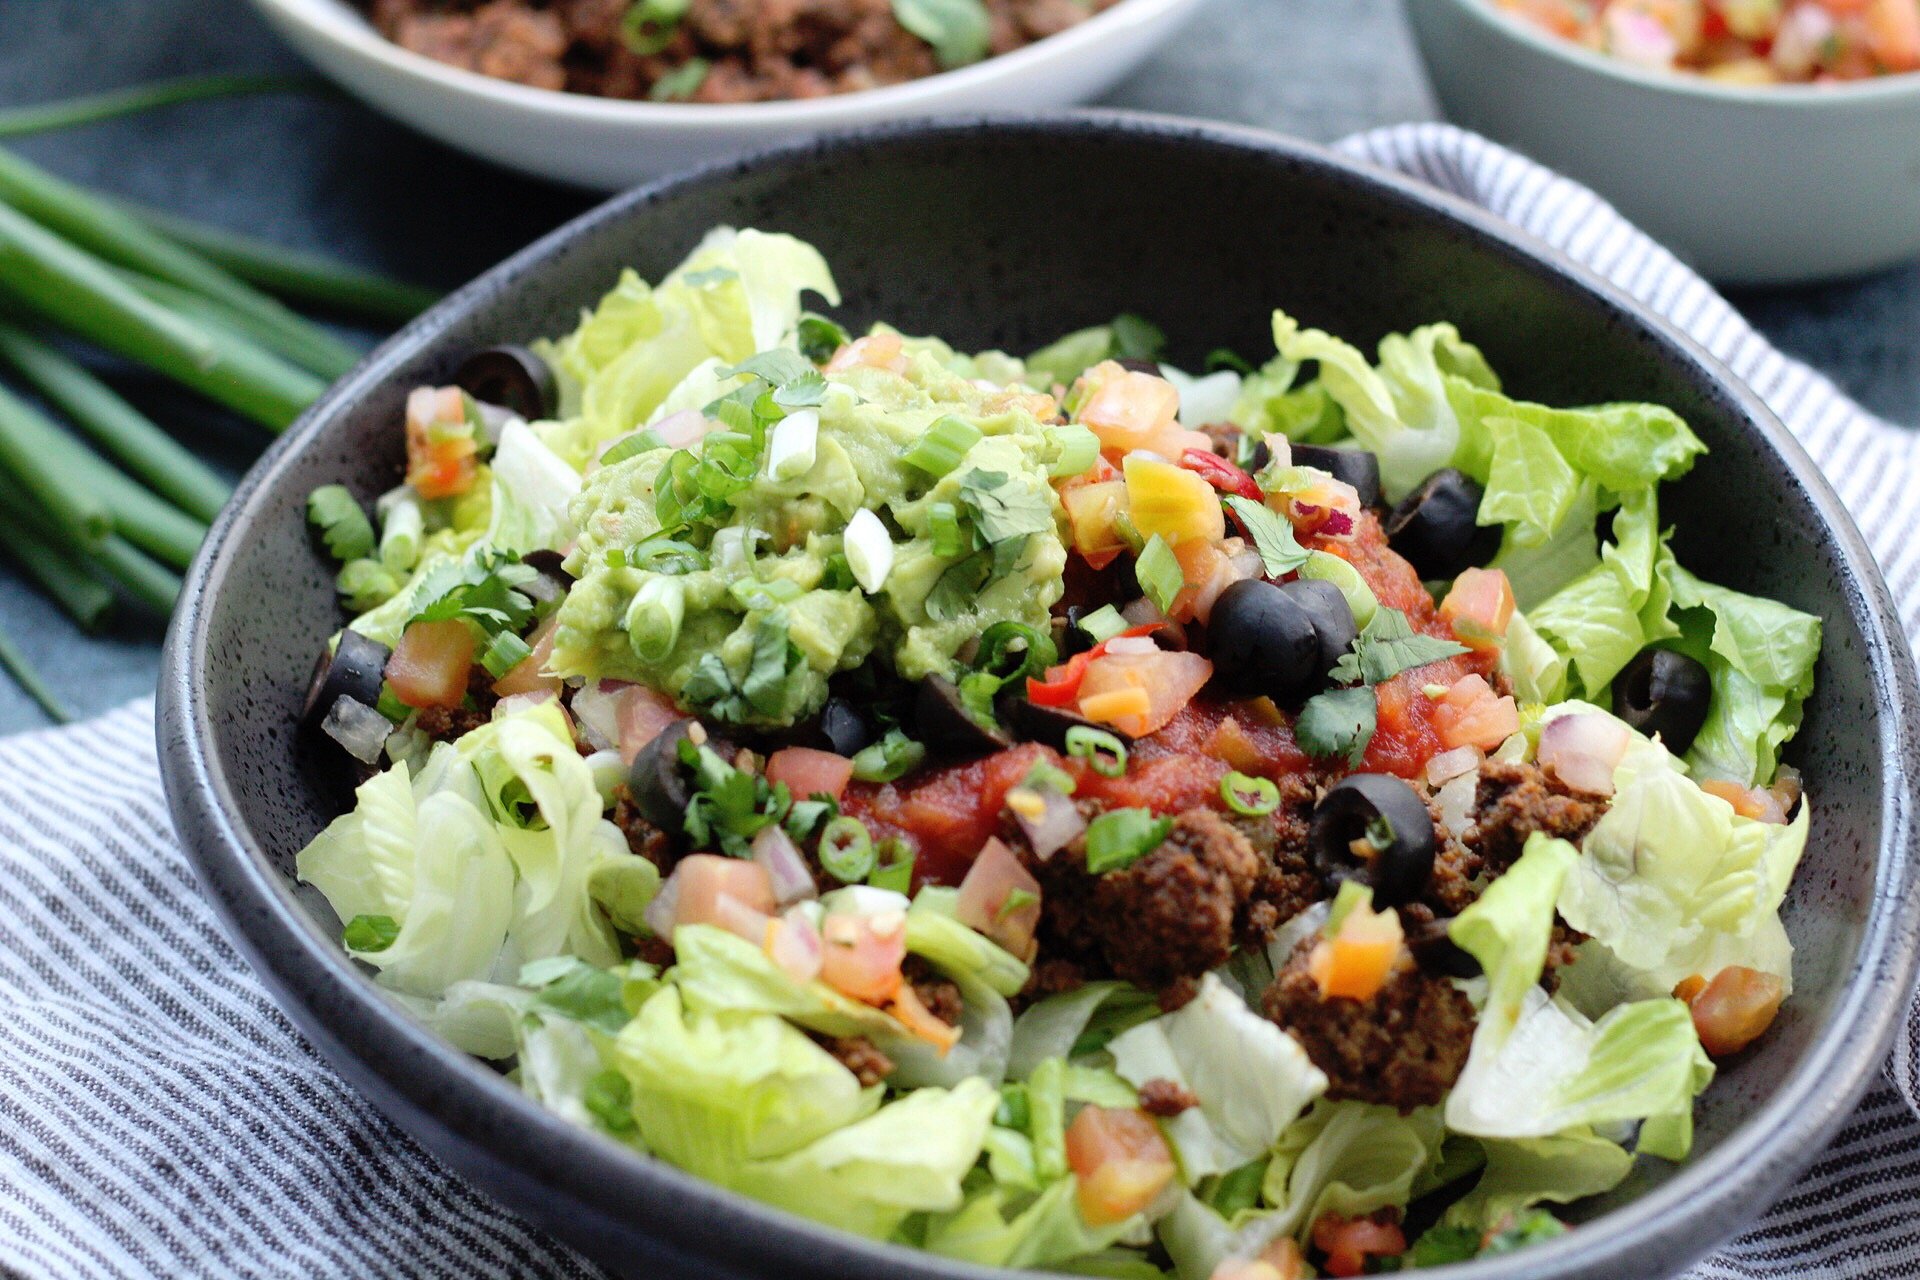 Quick instant pot taco meat that you can make in less than 20 minutes. Perfect for a low carb lunch, easy whole30 dinner or paleo meal prep! #whole30 #paleo #whole30beef #whole30instantpot